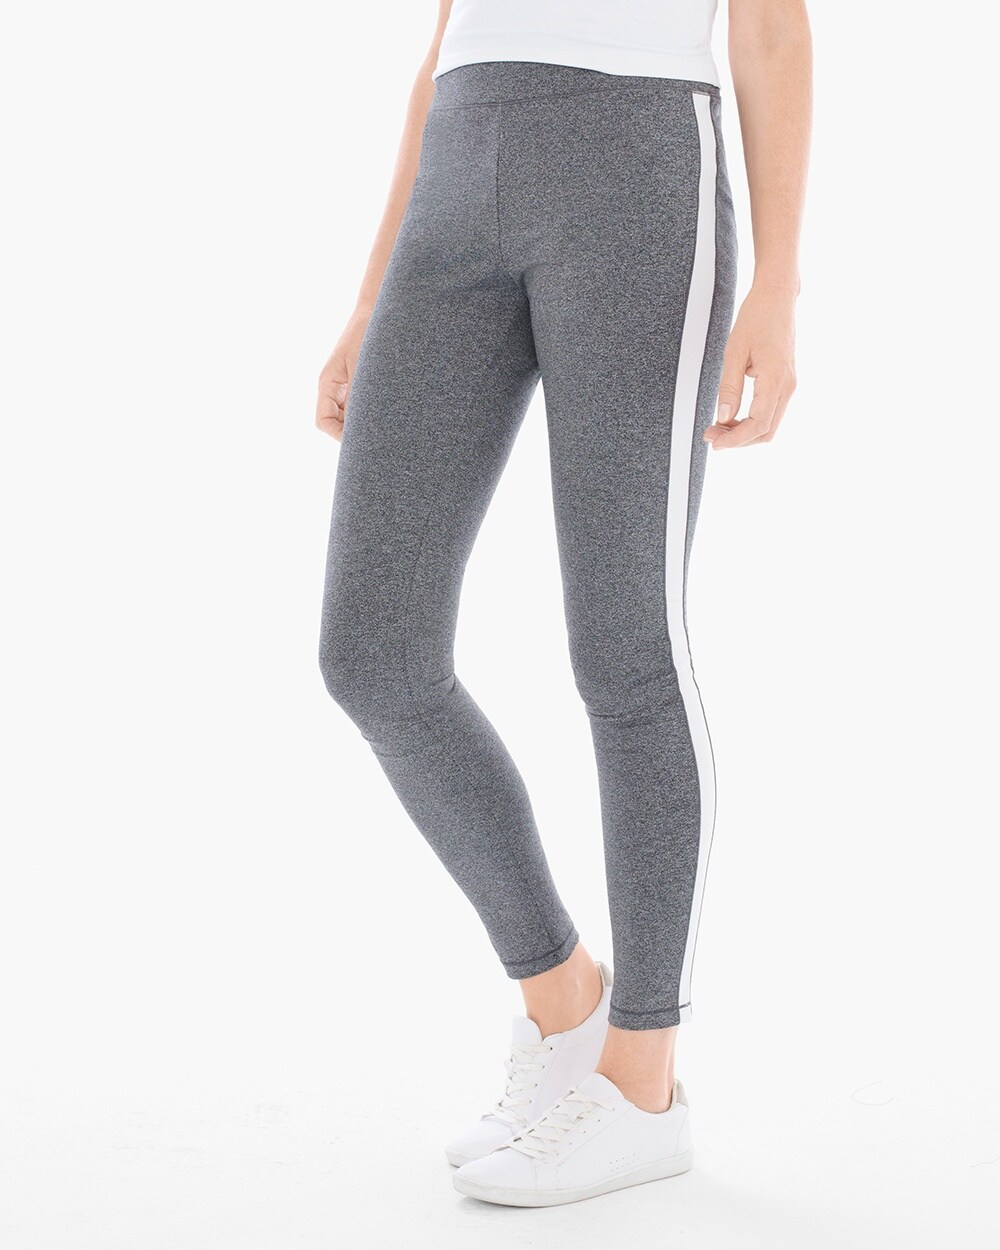 Zenergy Knit Collection Side Stripe Leggings - Chico's